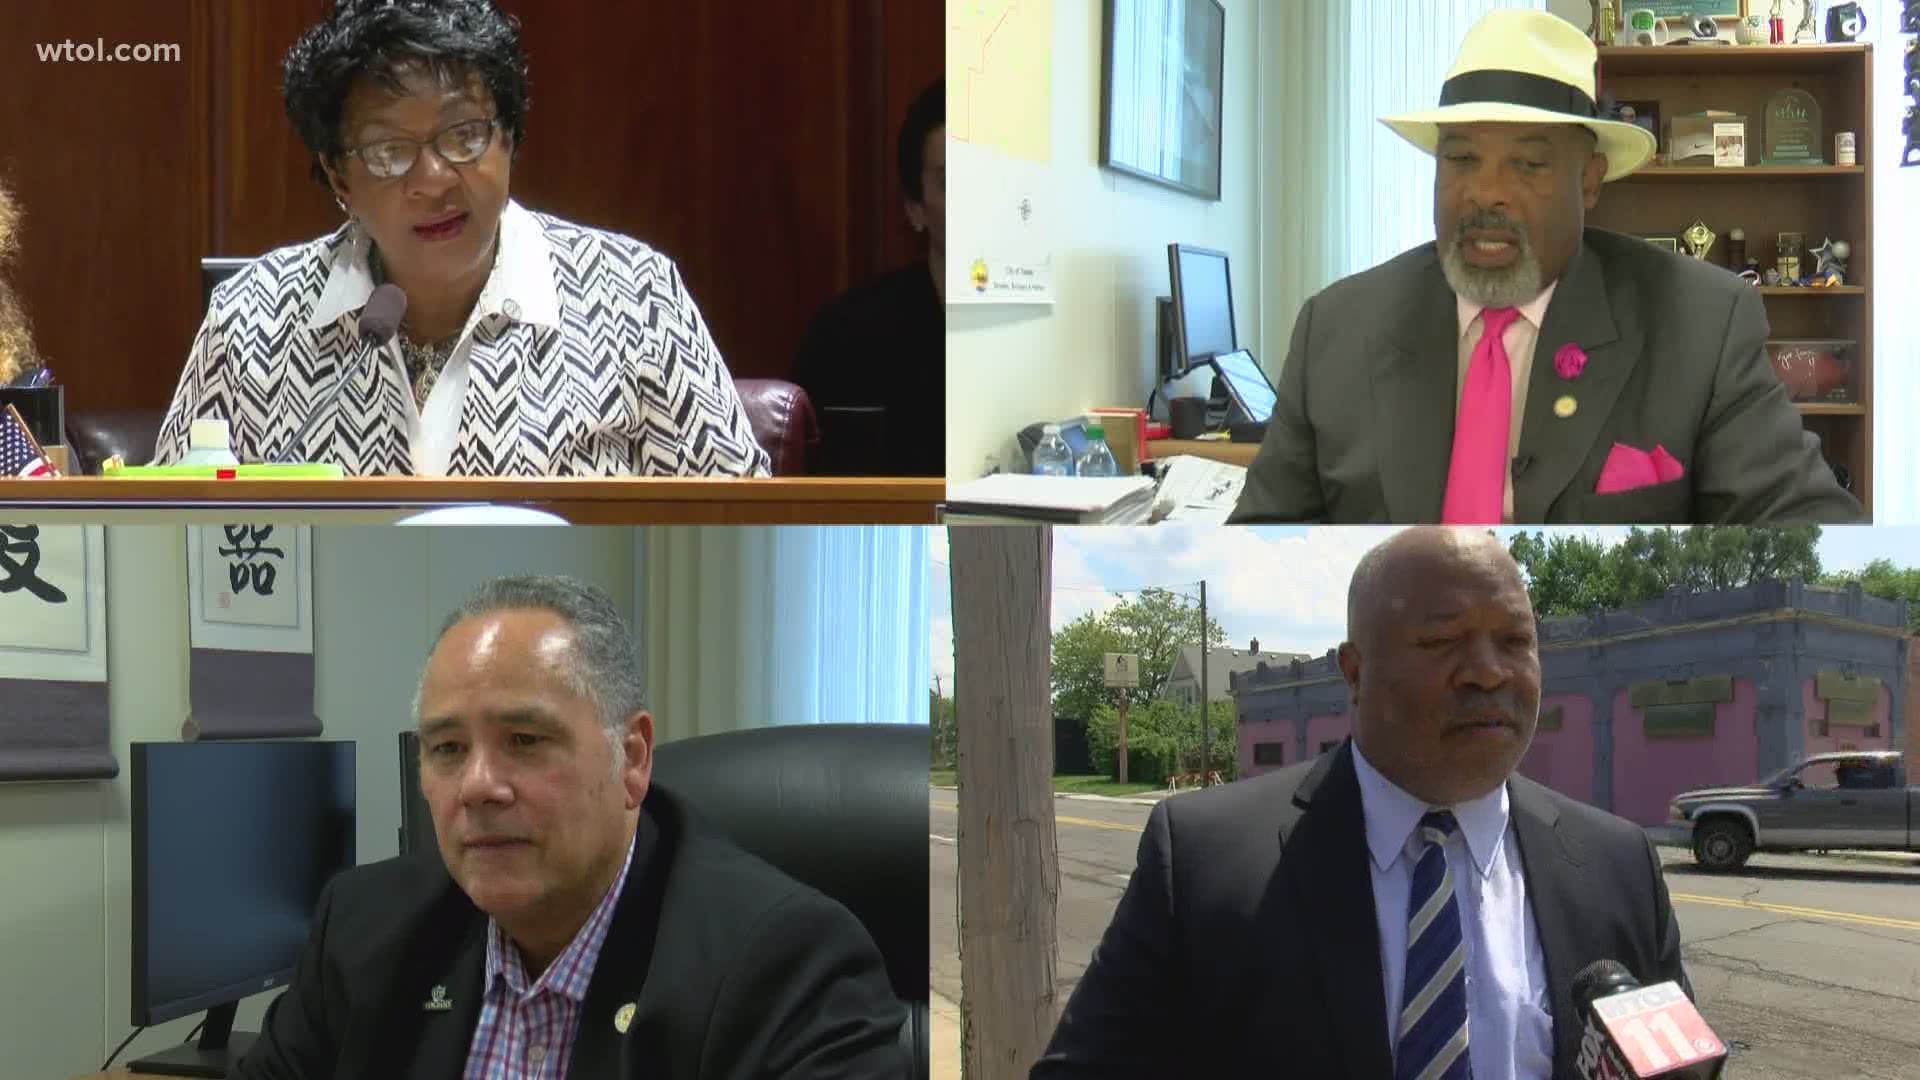 Team coverage from June 30: Details on the arrest of 4 city council members who are involved in bribes-for-votes scandal.